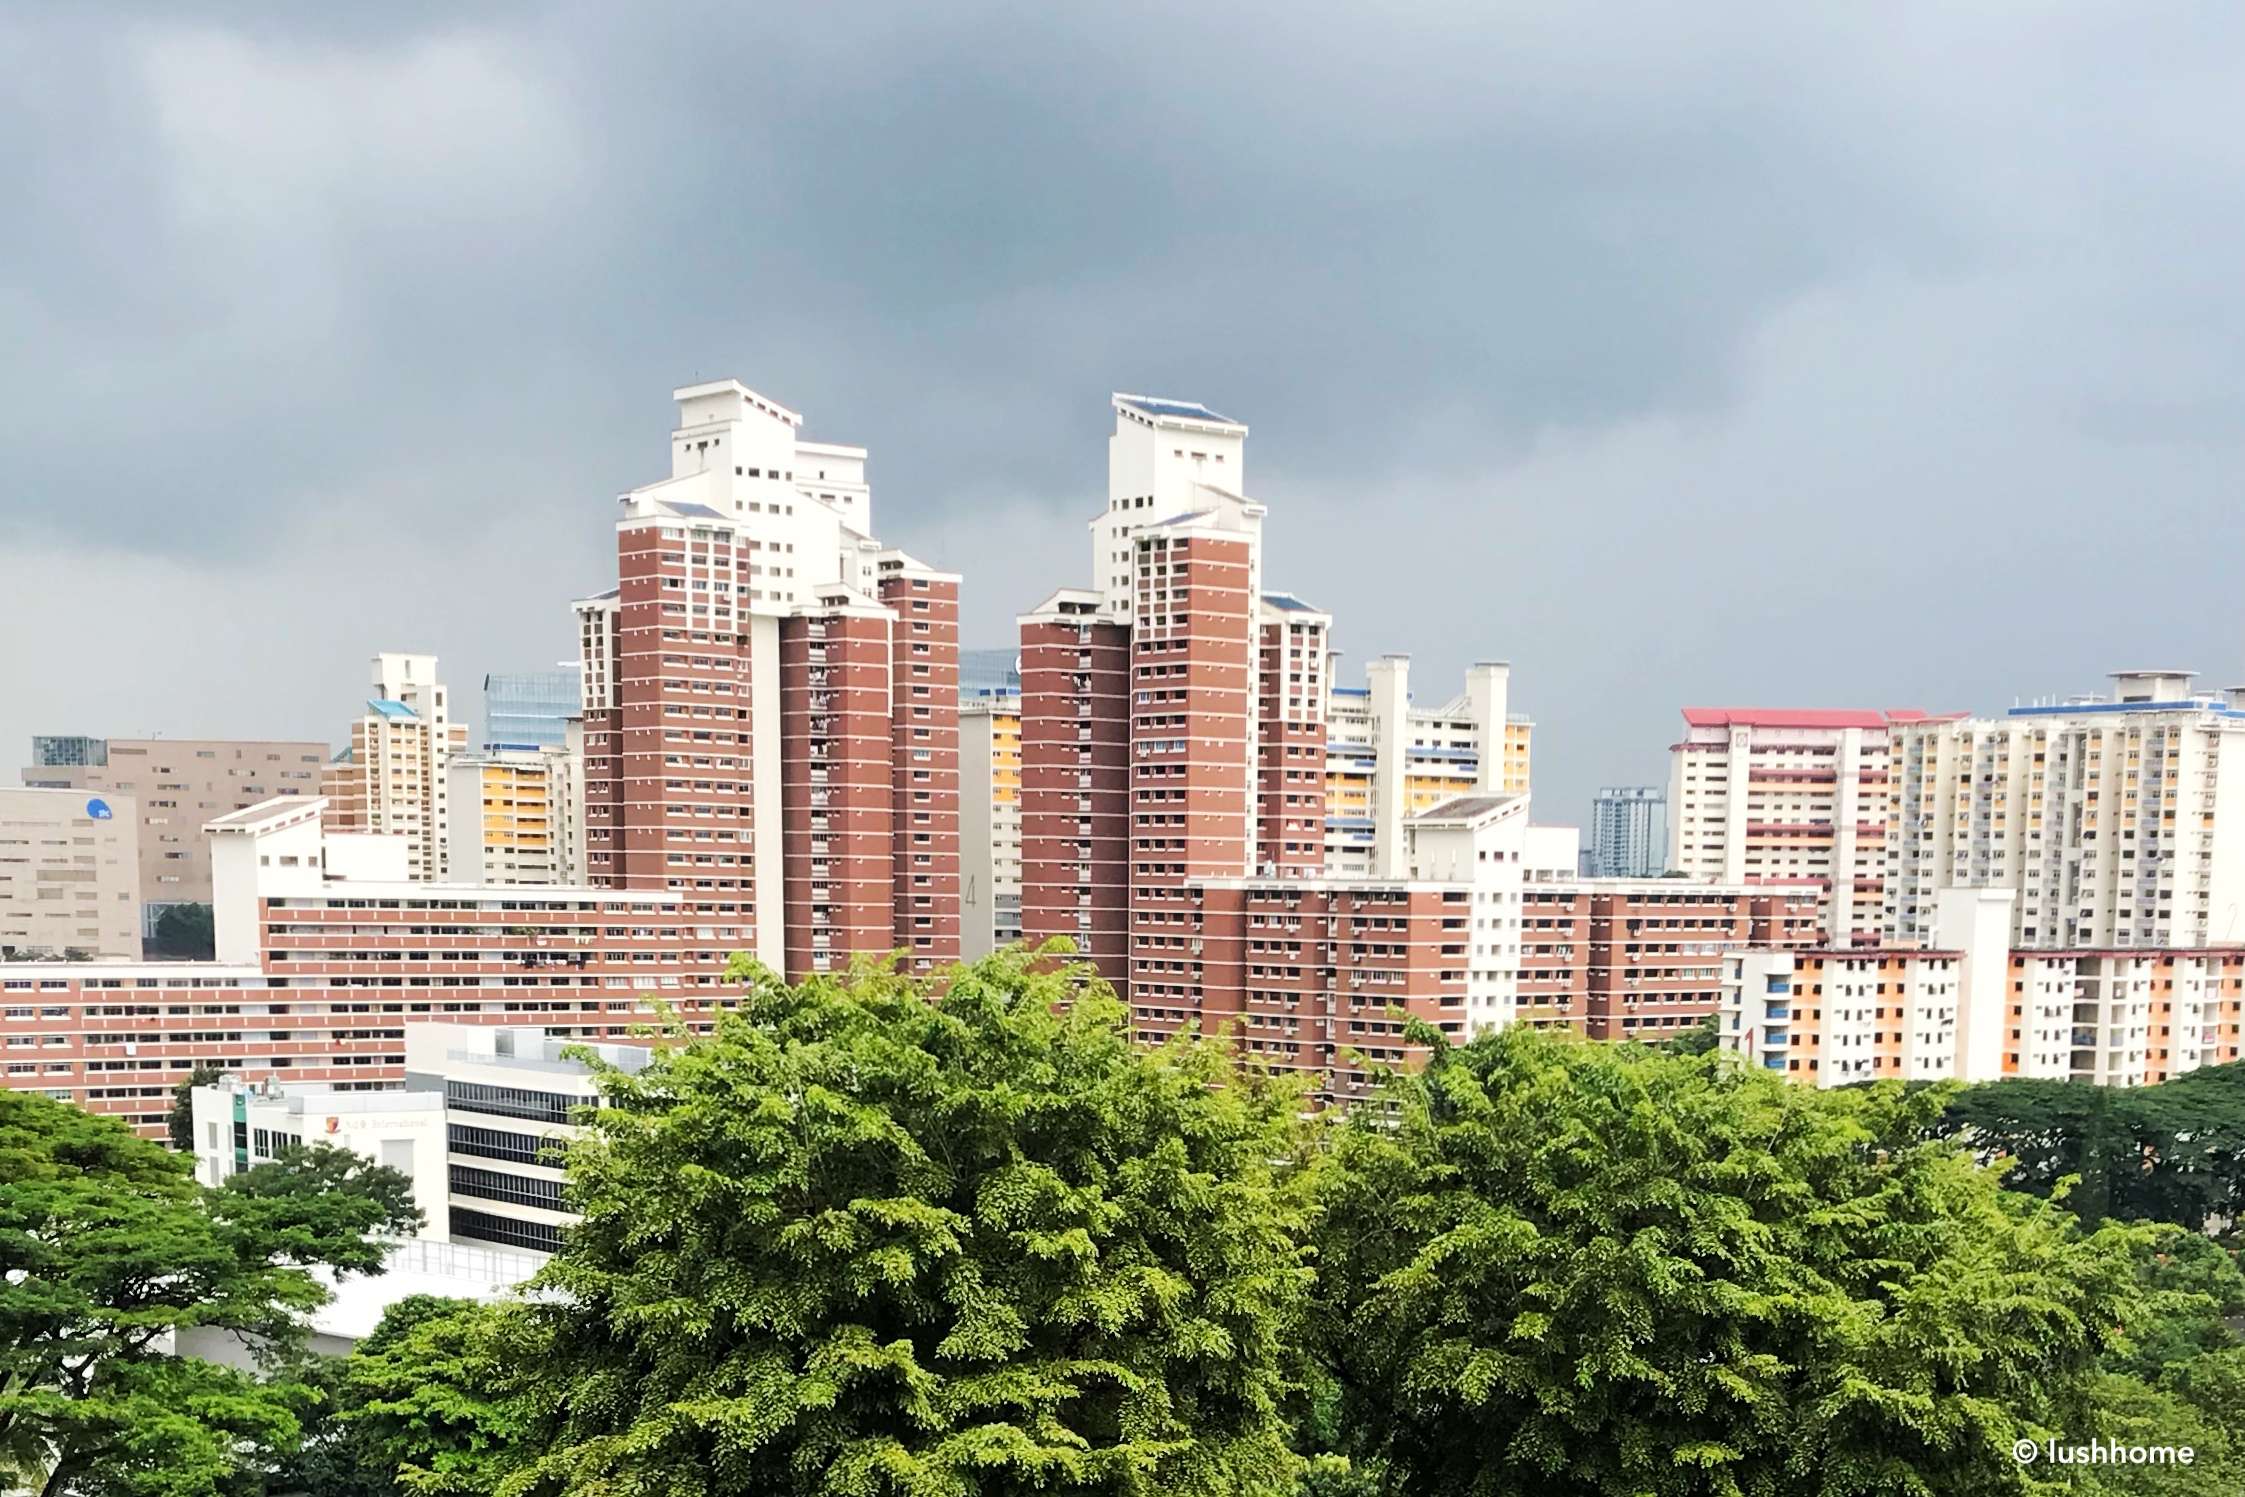 A look at HDB flat affordability after recent housing policy moves